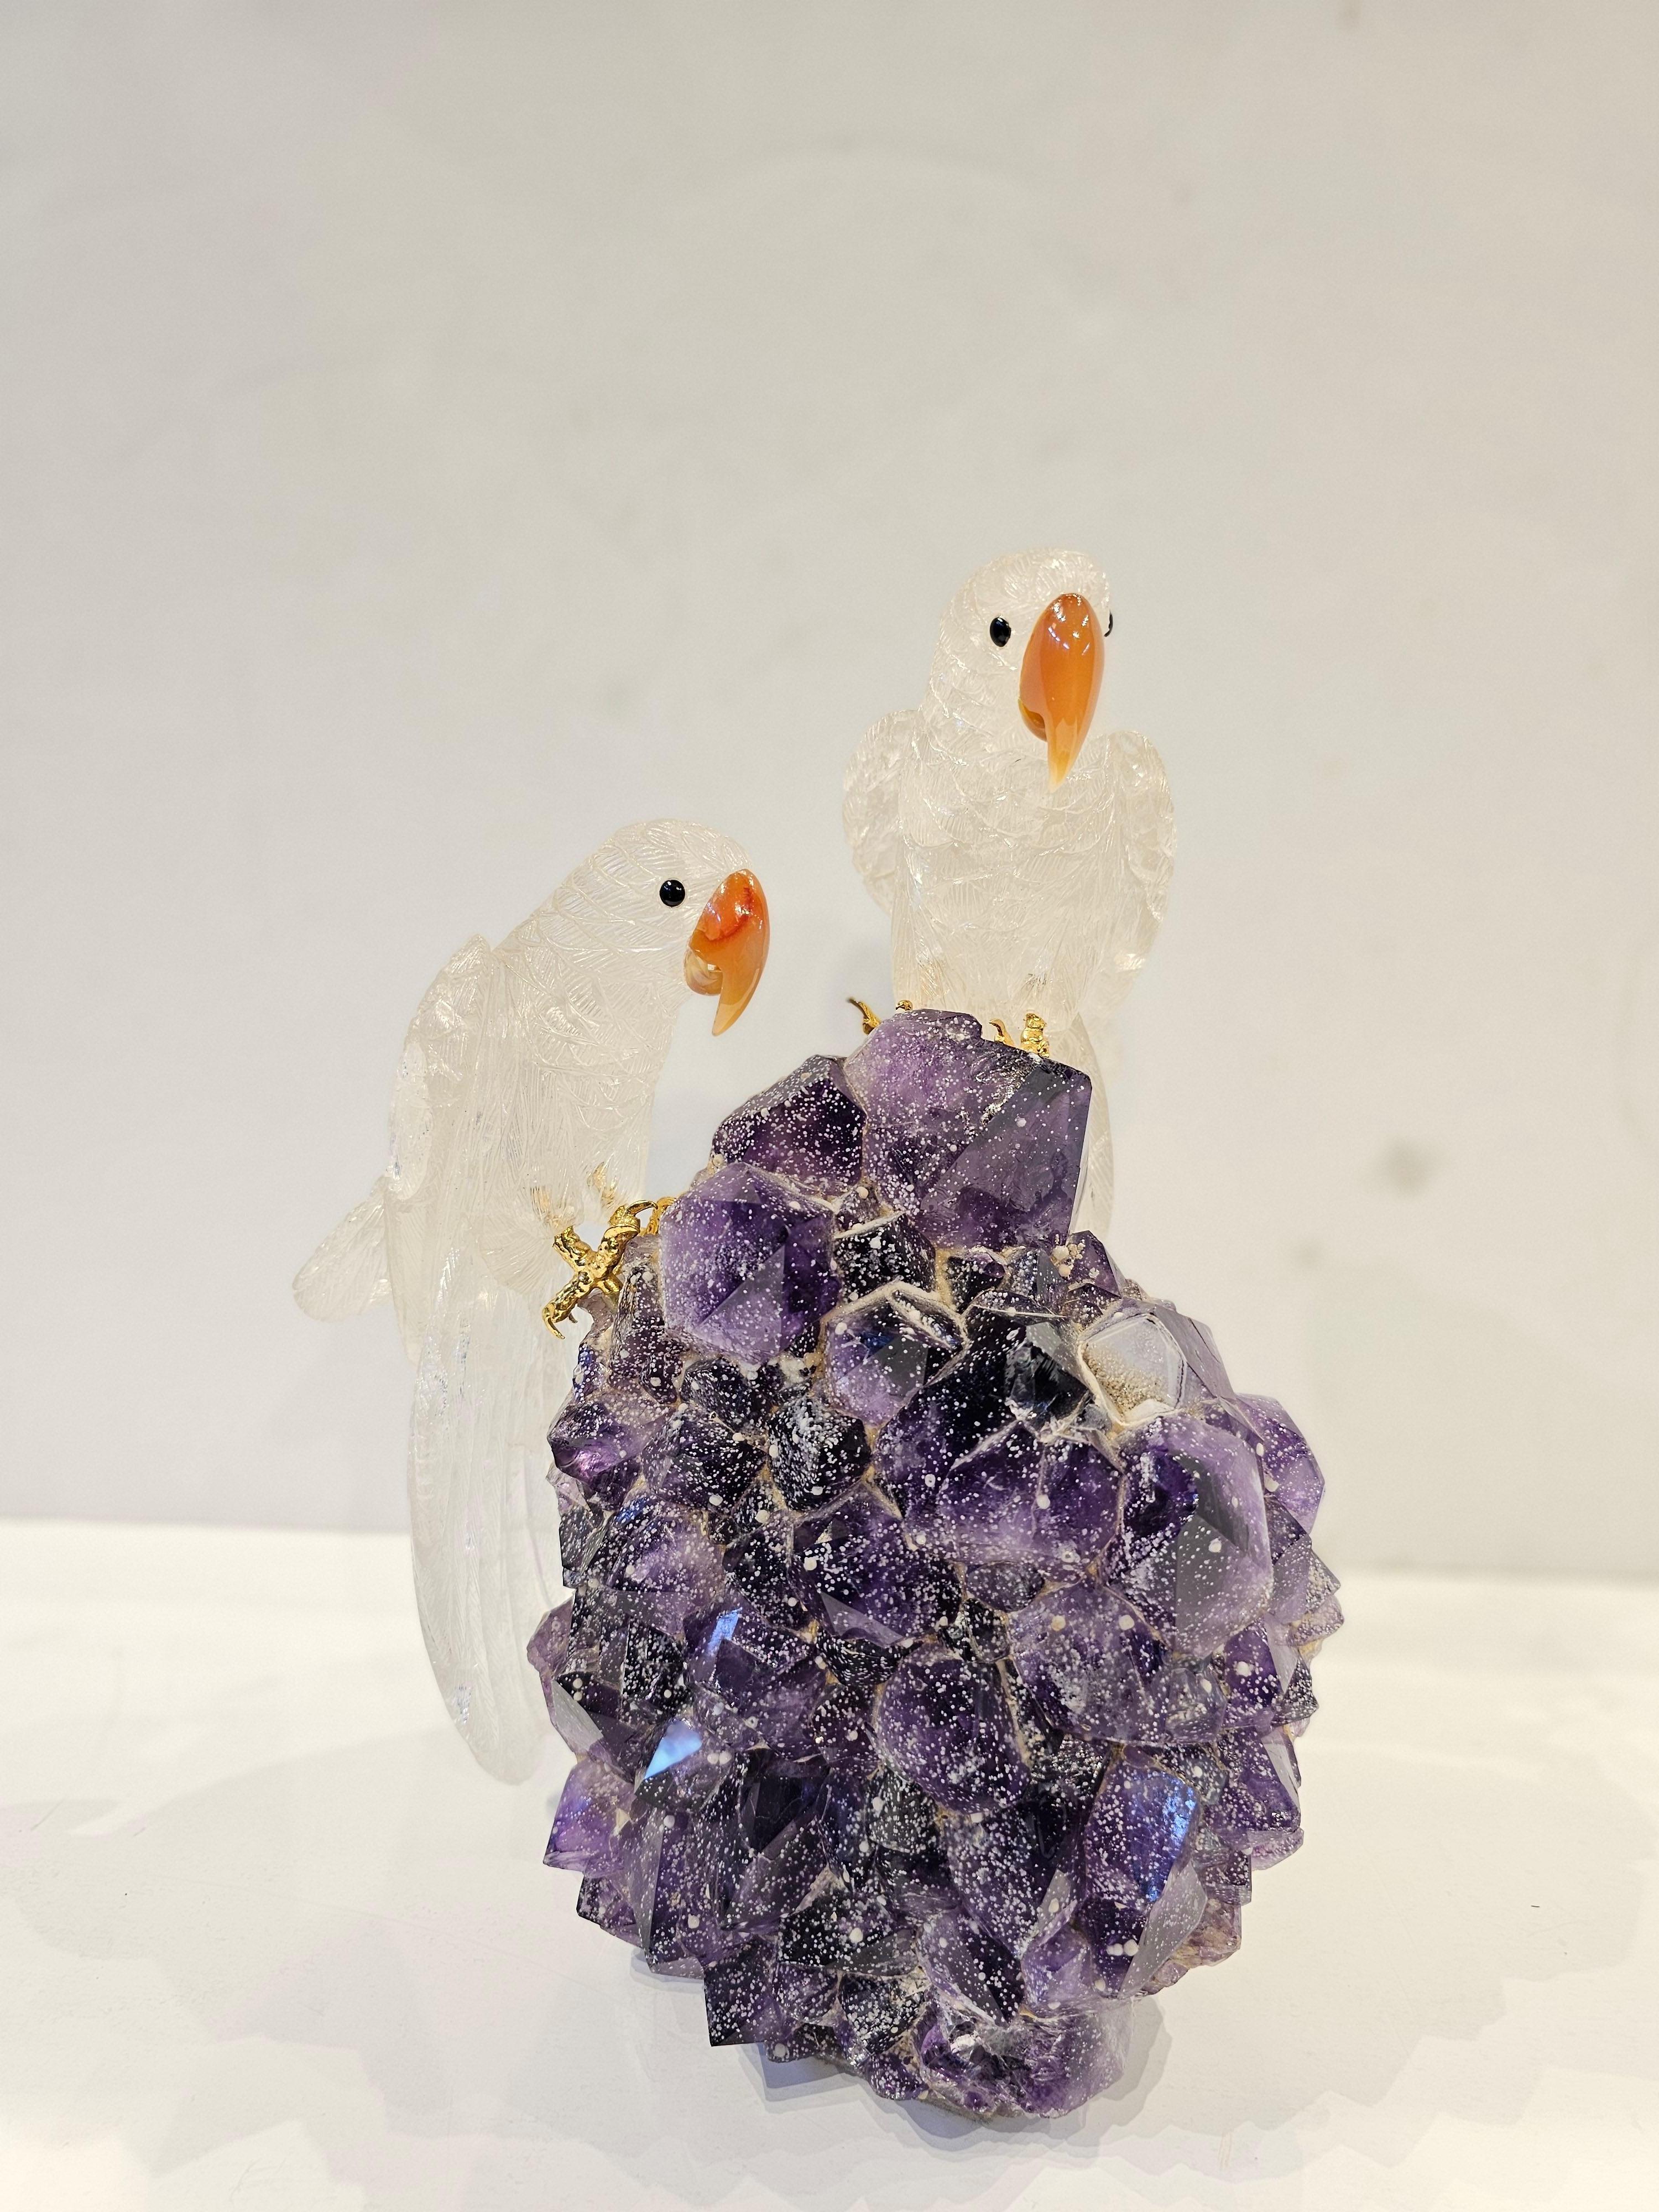 Large Boucheron Amethyst & Rock Crystal Bird Desk Object
 
A large rough amethyst crystal adorned with a pair of beautifully carved rock crystal parrots with carnelian beaks, onyx eyes, and 18 karat gold claws

Signed Boucheron 

Circa